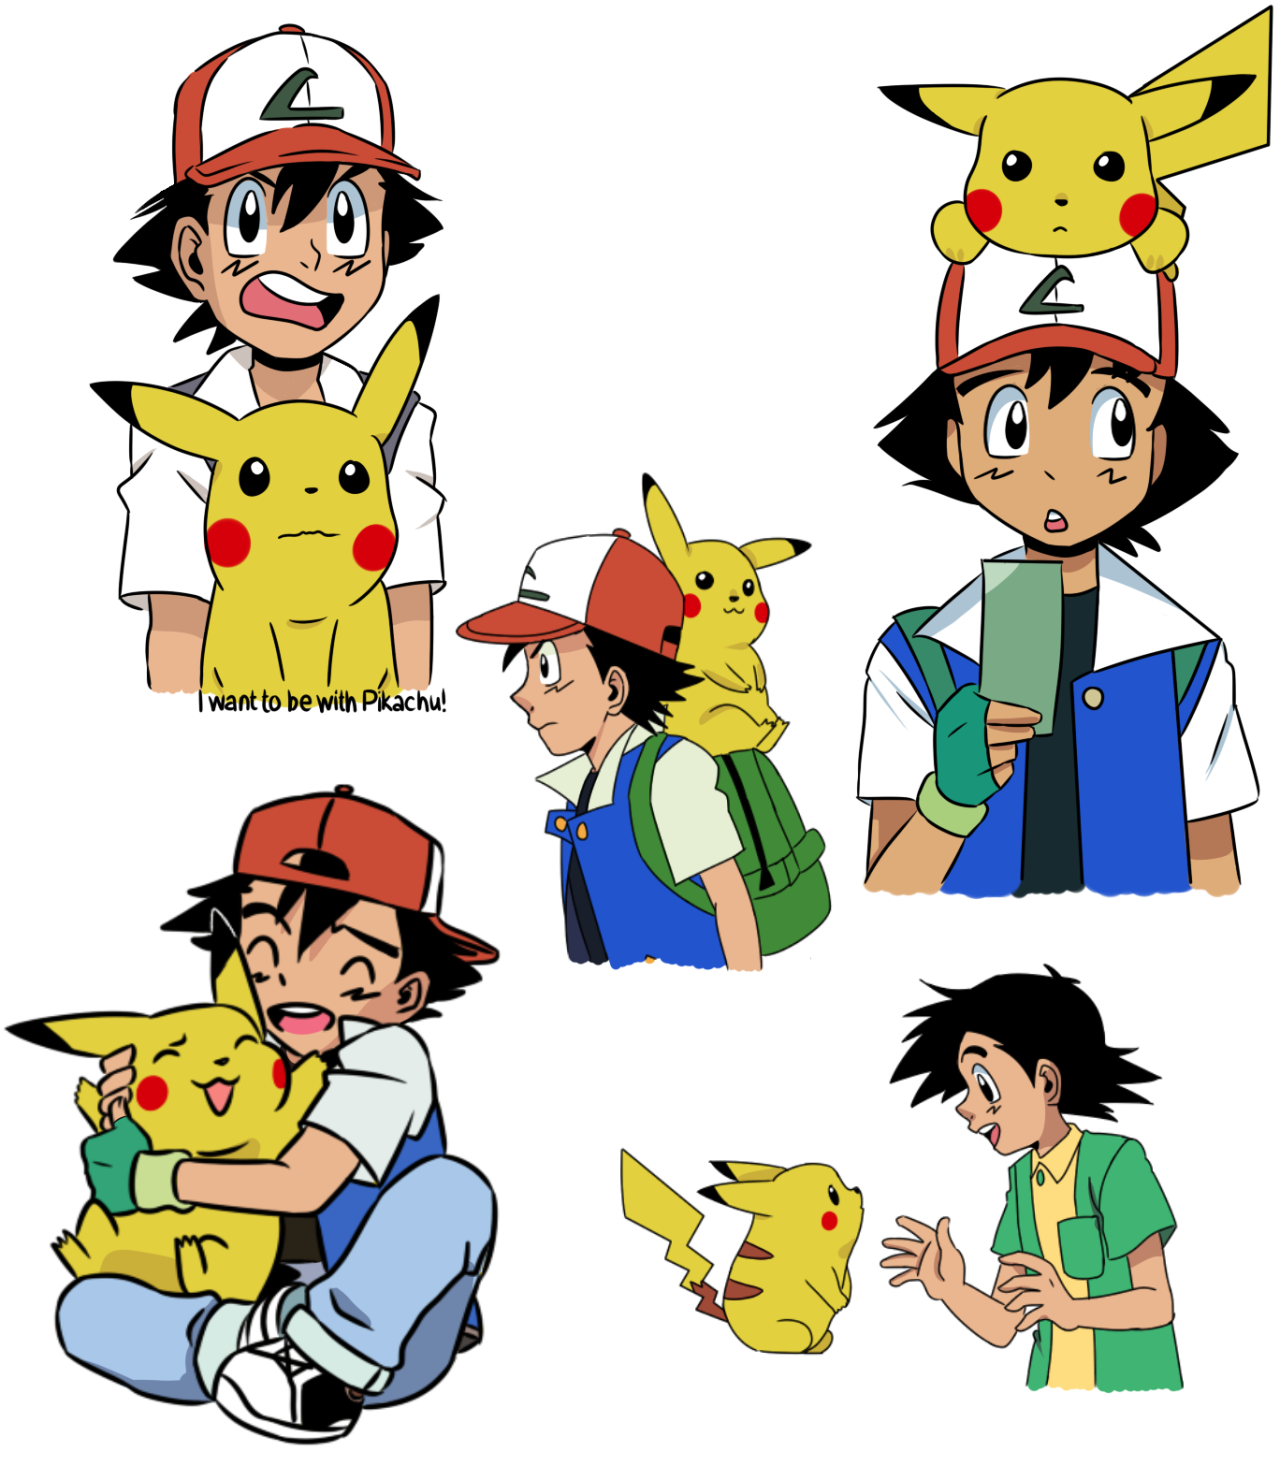 sparkly-arts: I’m not really sure why but I felt the urge to draw Ash and Pikachu